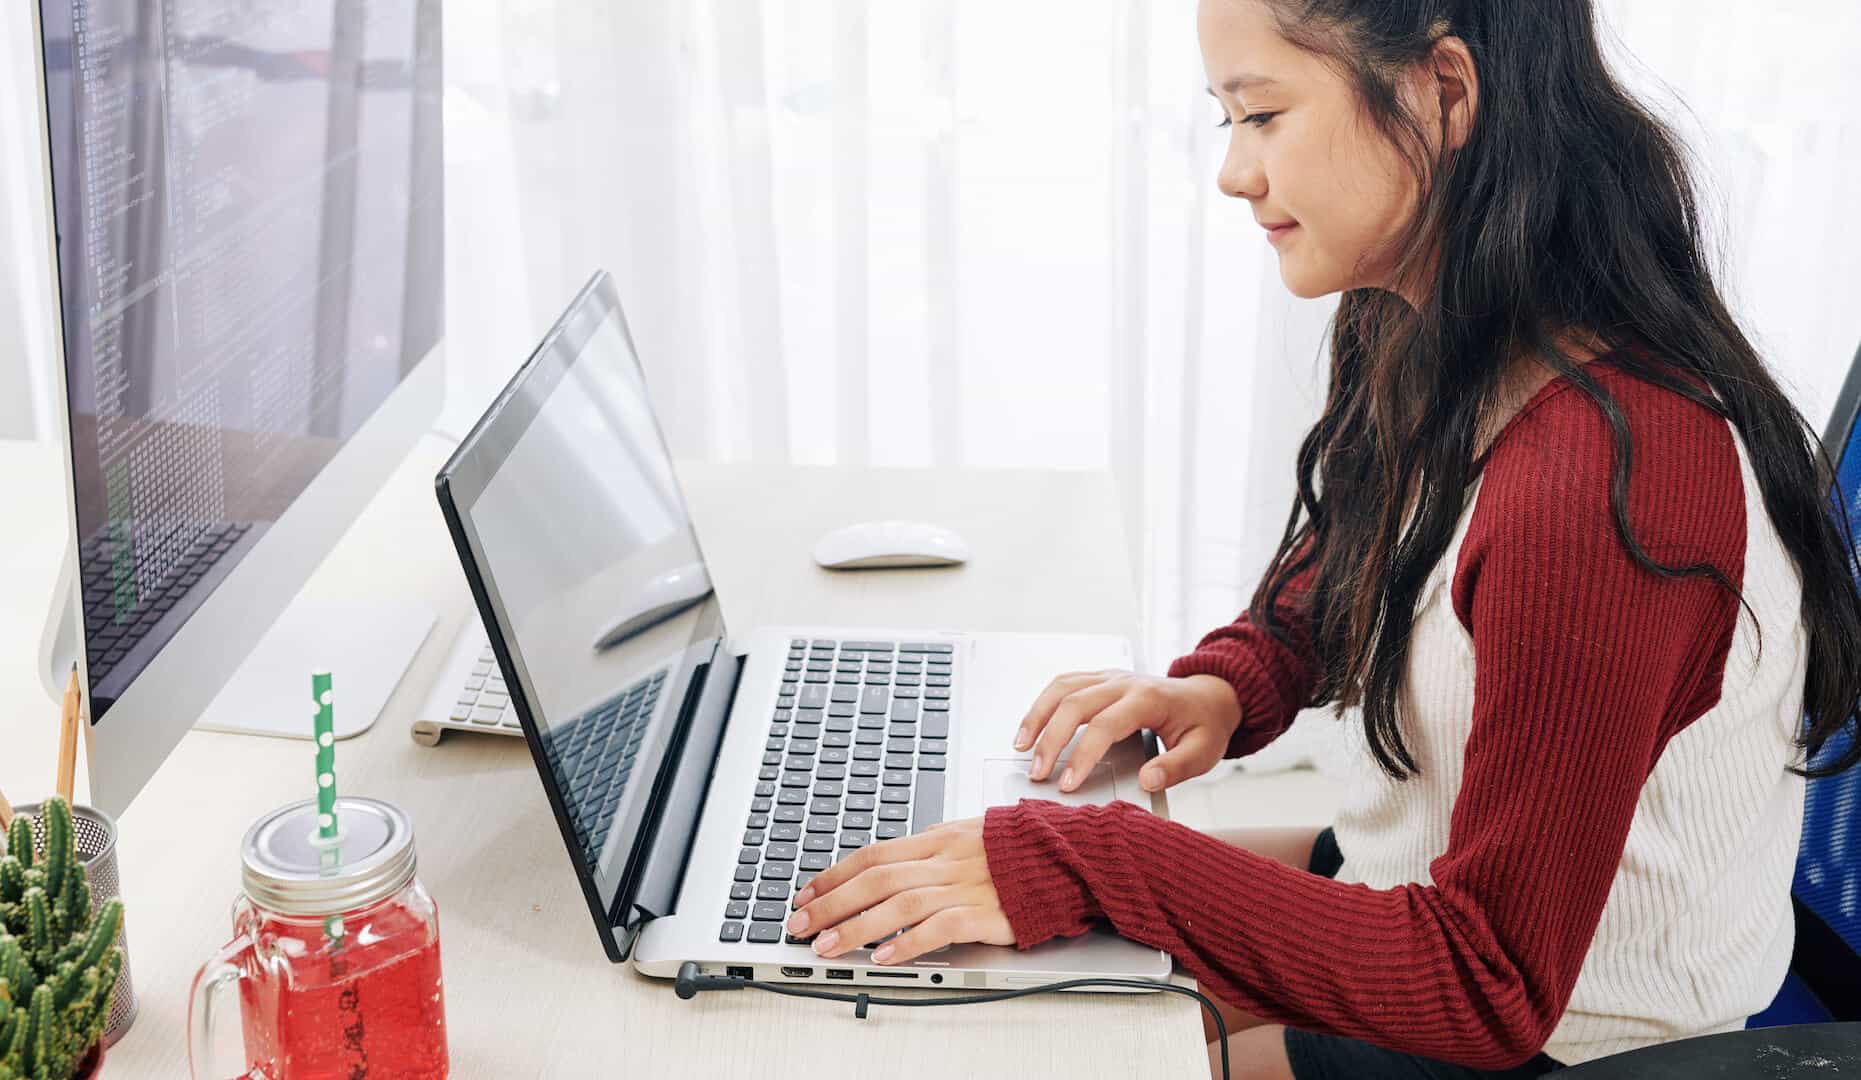 Girl at her laptop